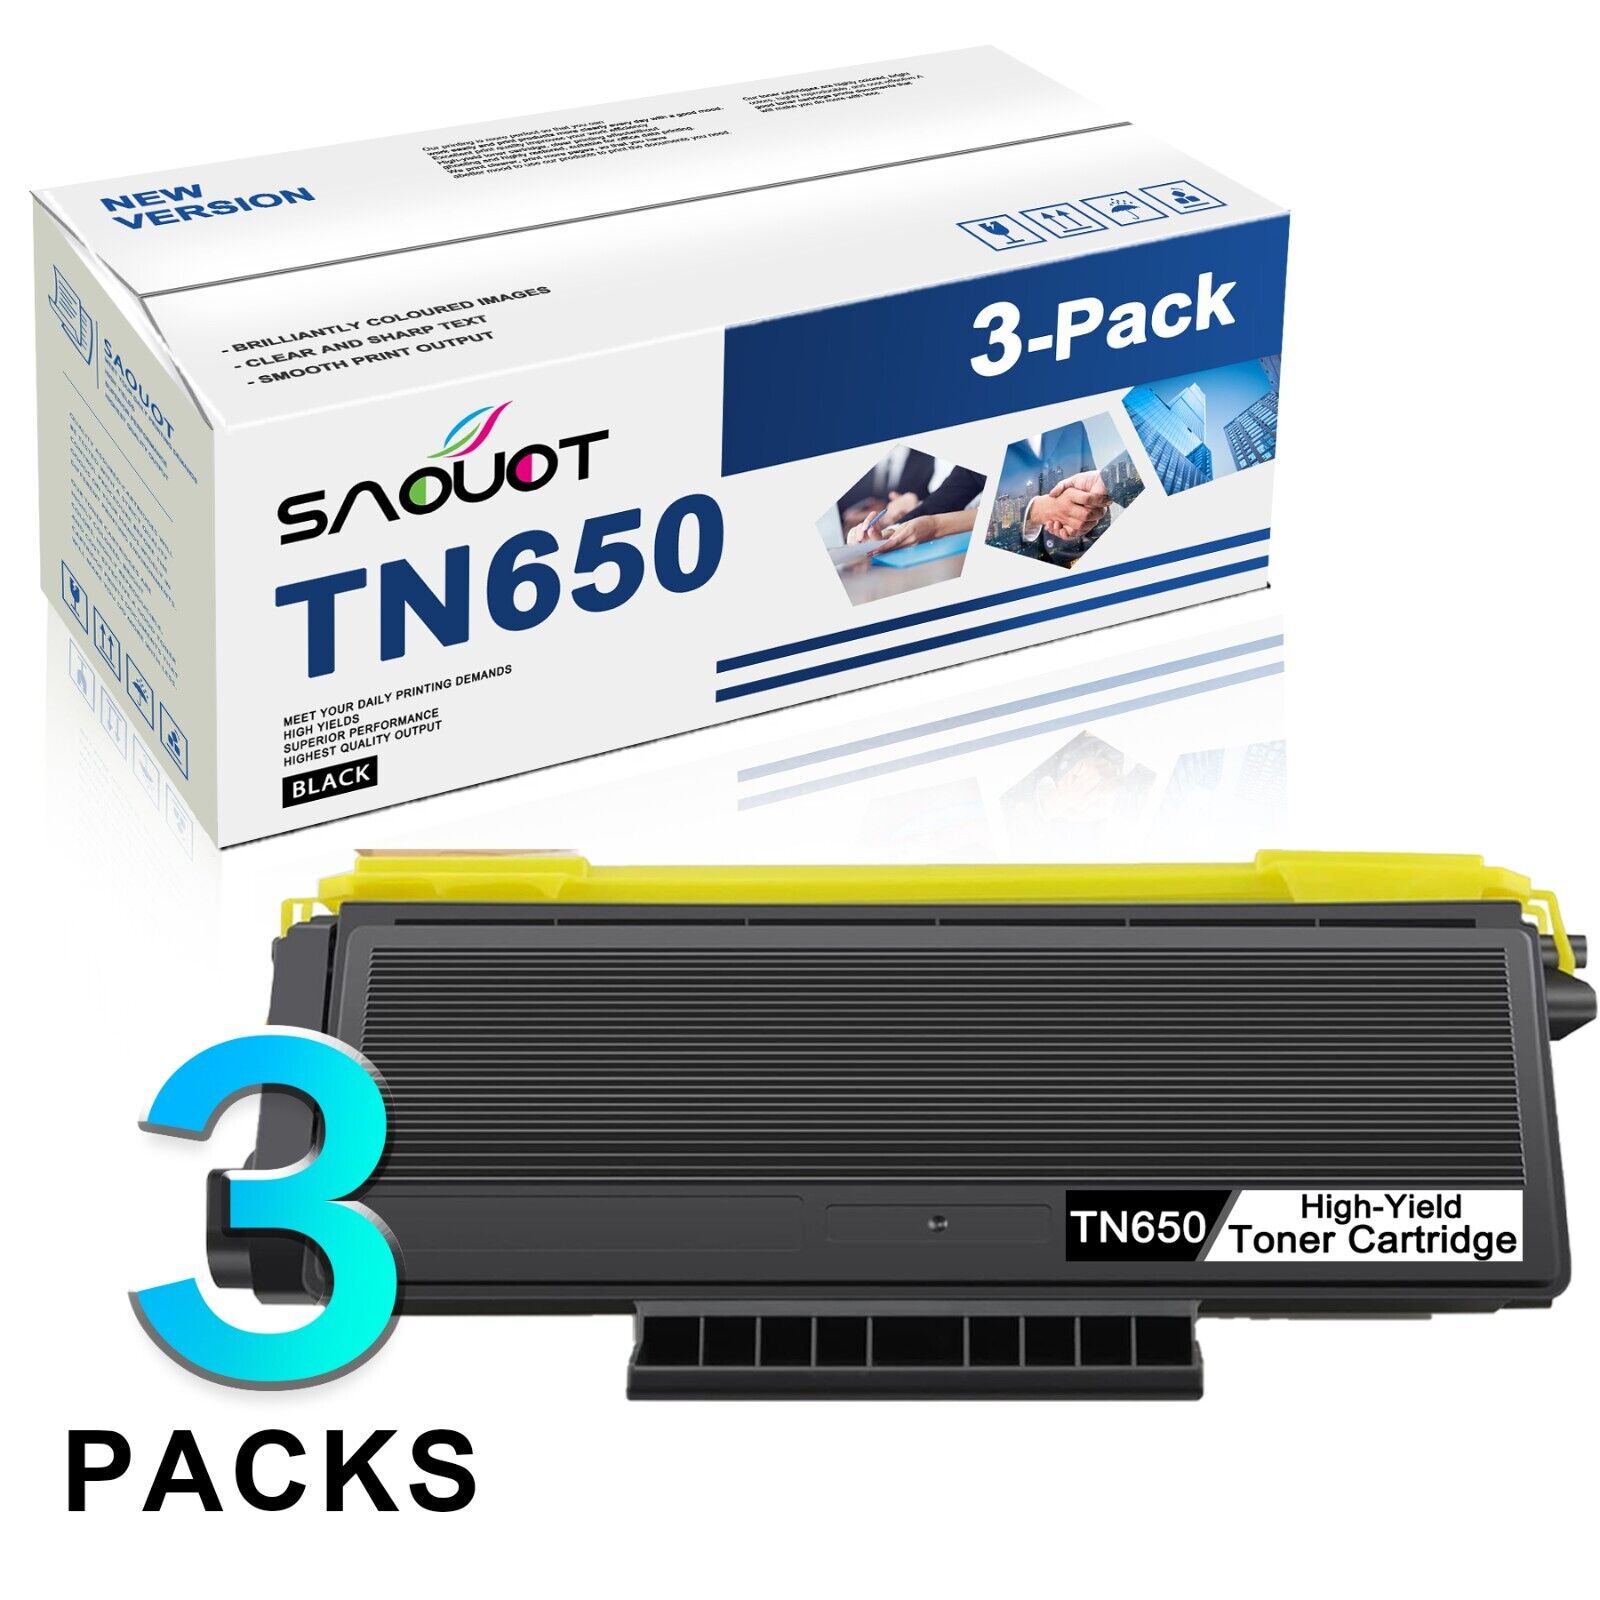 3PK TN 650 TN650 Toner Cartridge Replacement for Brother Black MFC-8480DN 8680DN